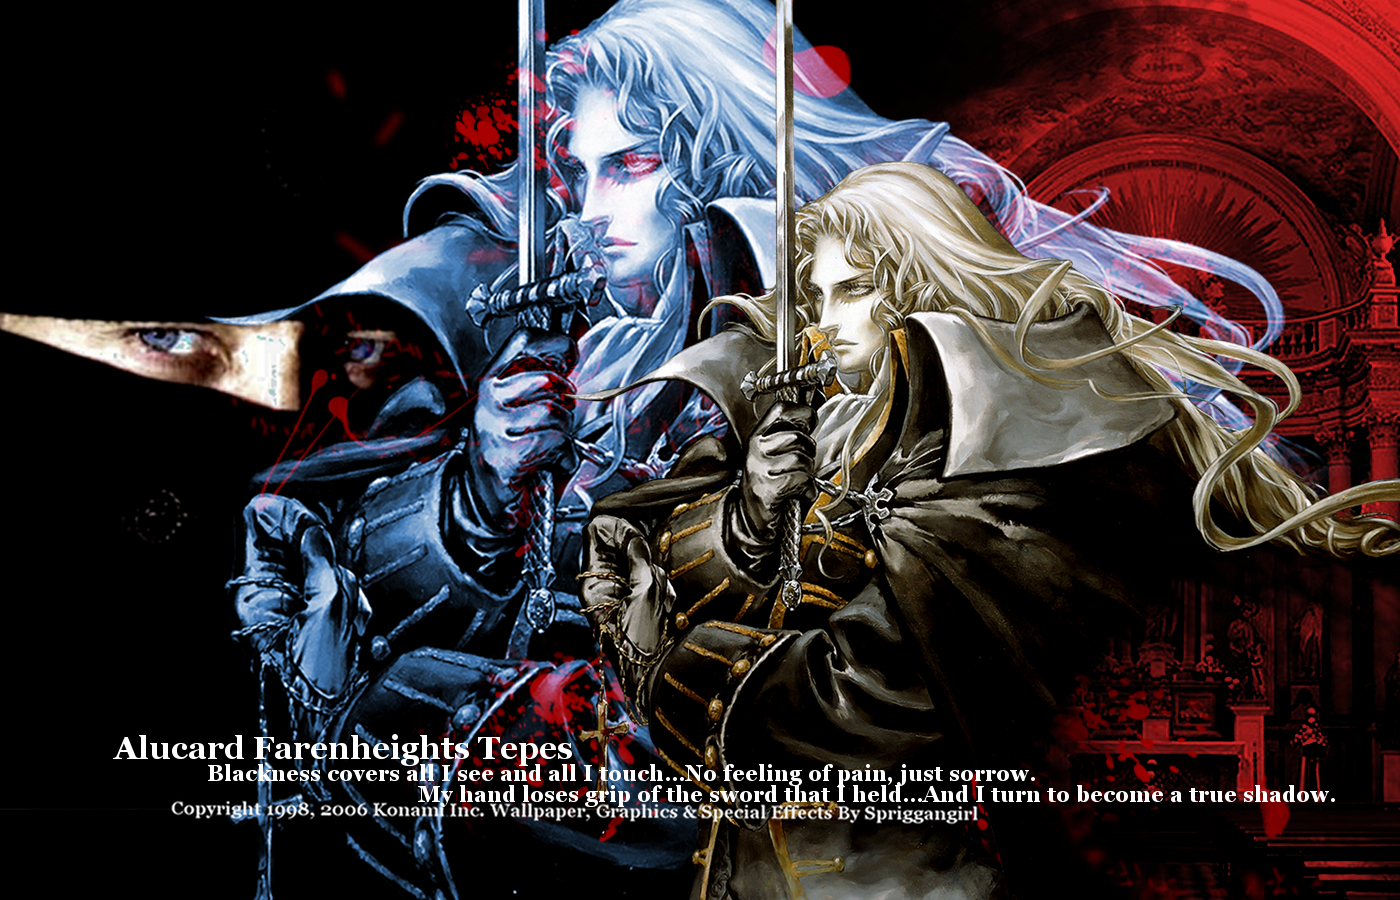 Castlevania Symphony Of The Night Wallpaper Crypt